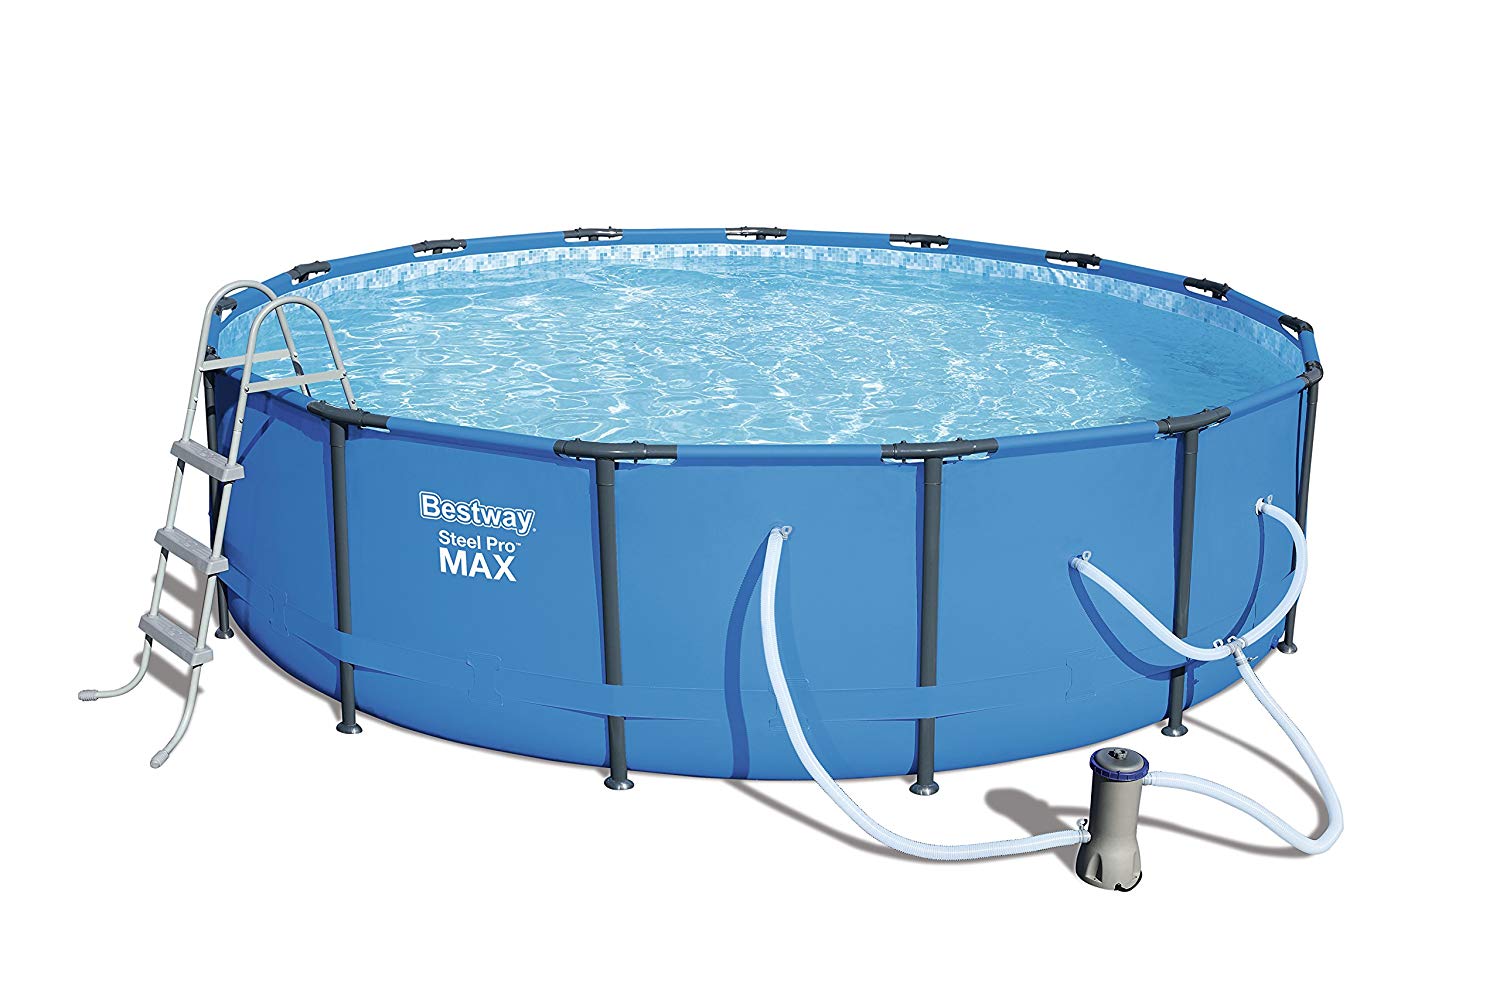 Bestway 56687E Steel Pro MAX 15'x42 Above Ground Best Sidewall Swimming Pools